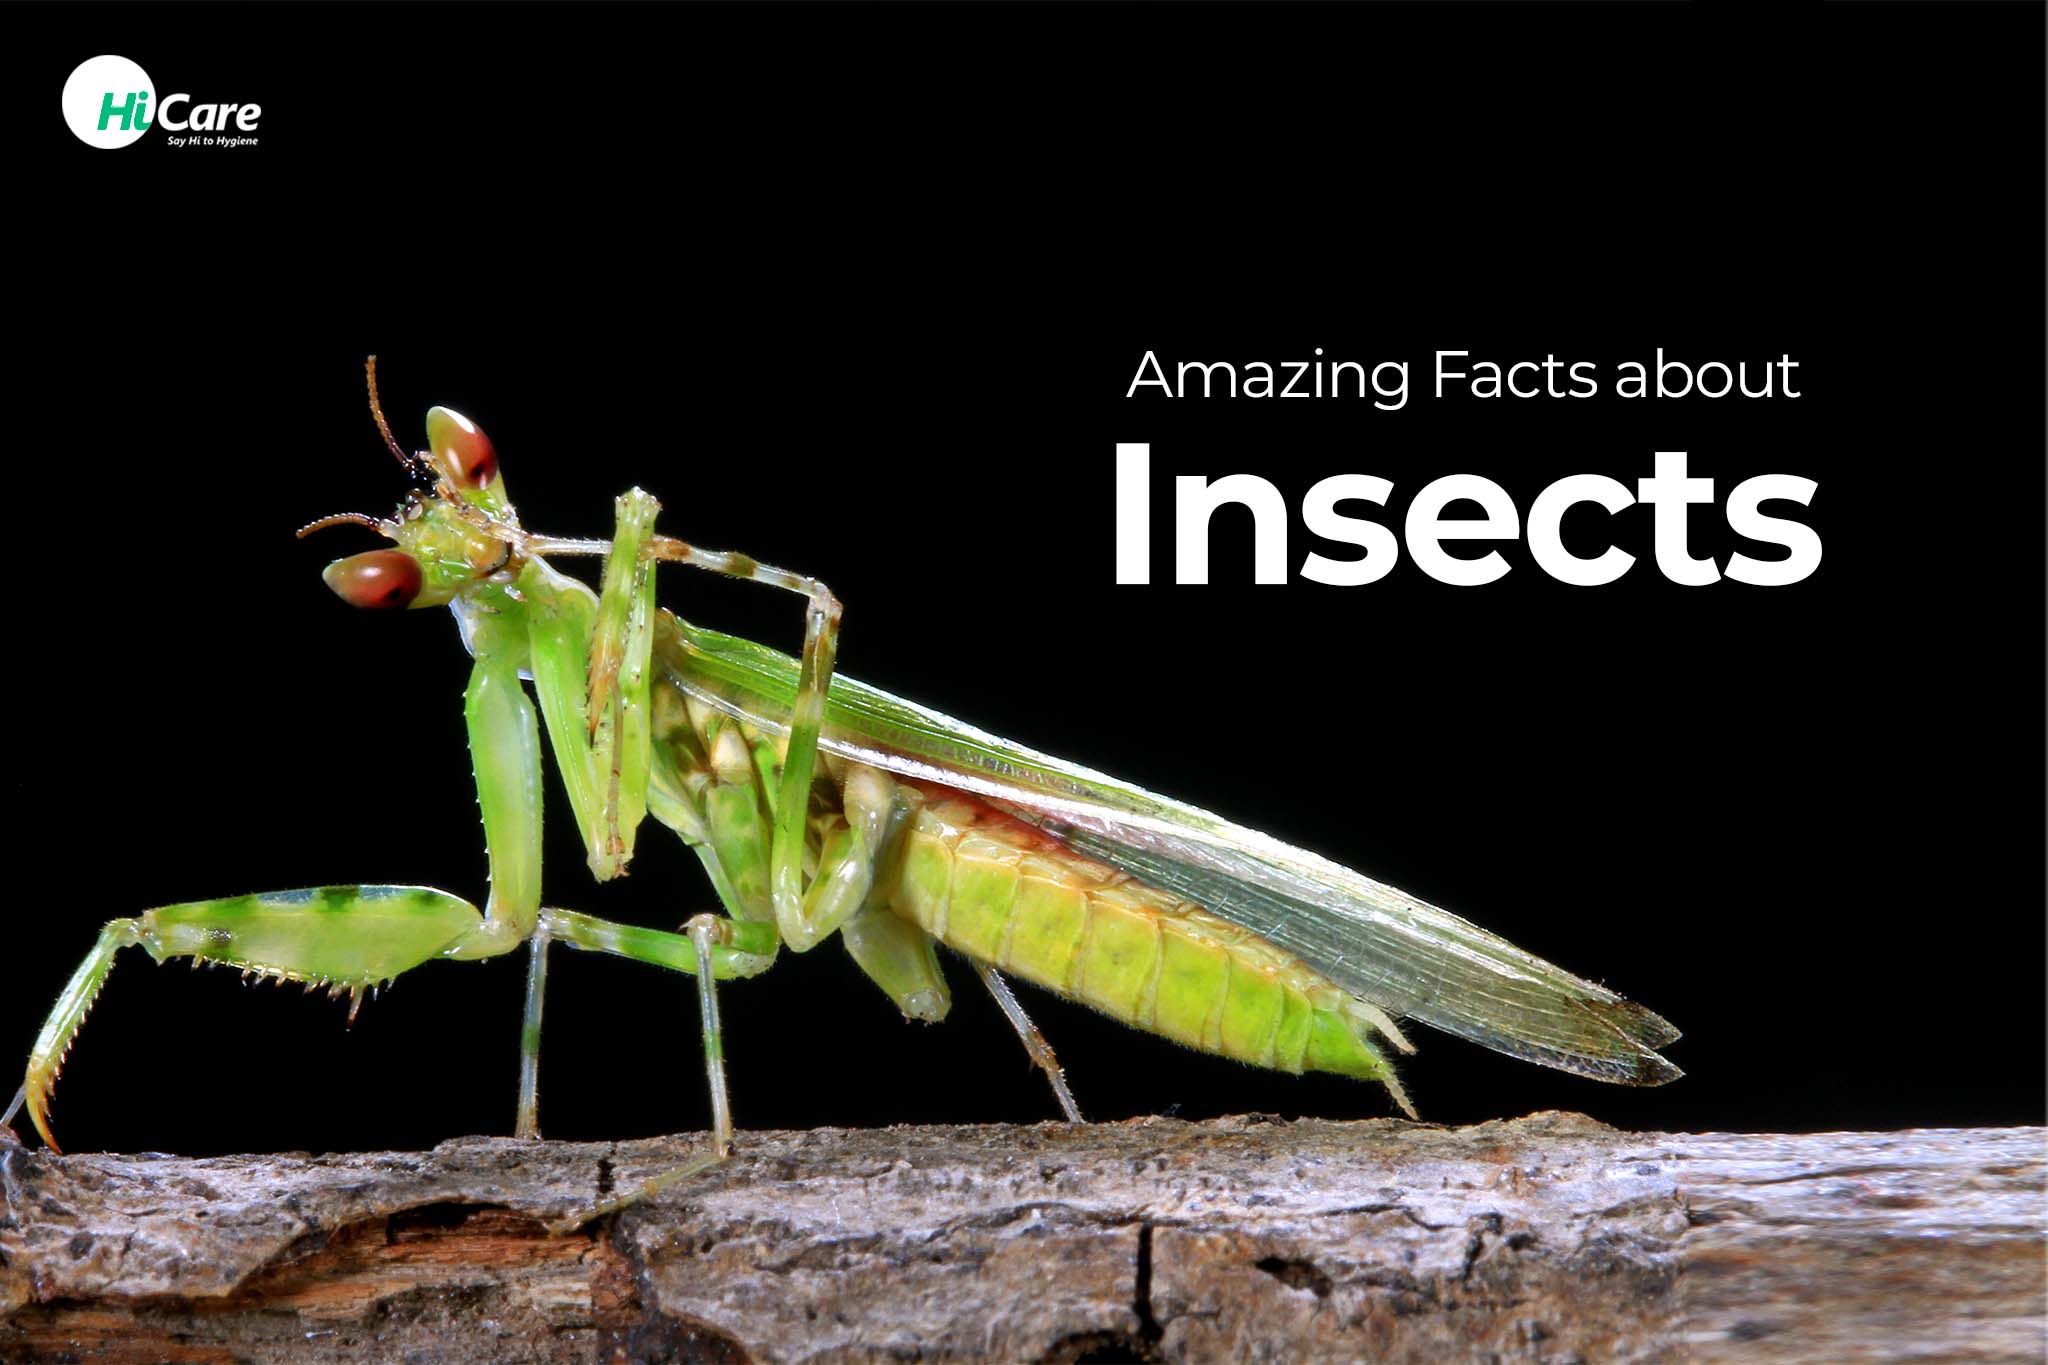 Amazing Facts about Insects